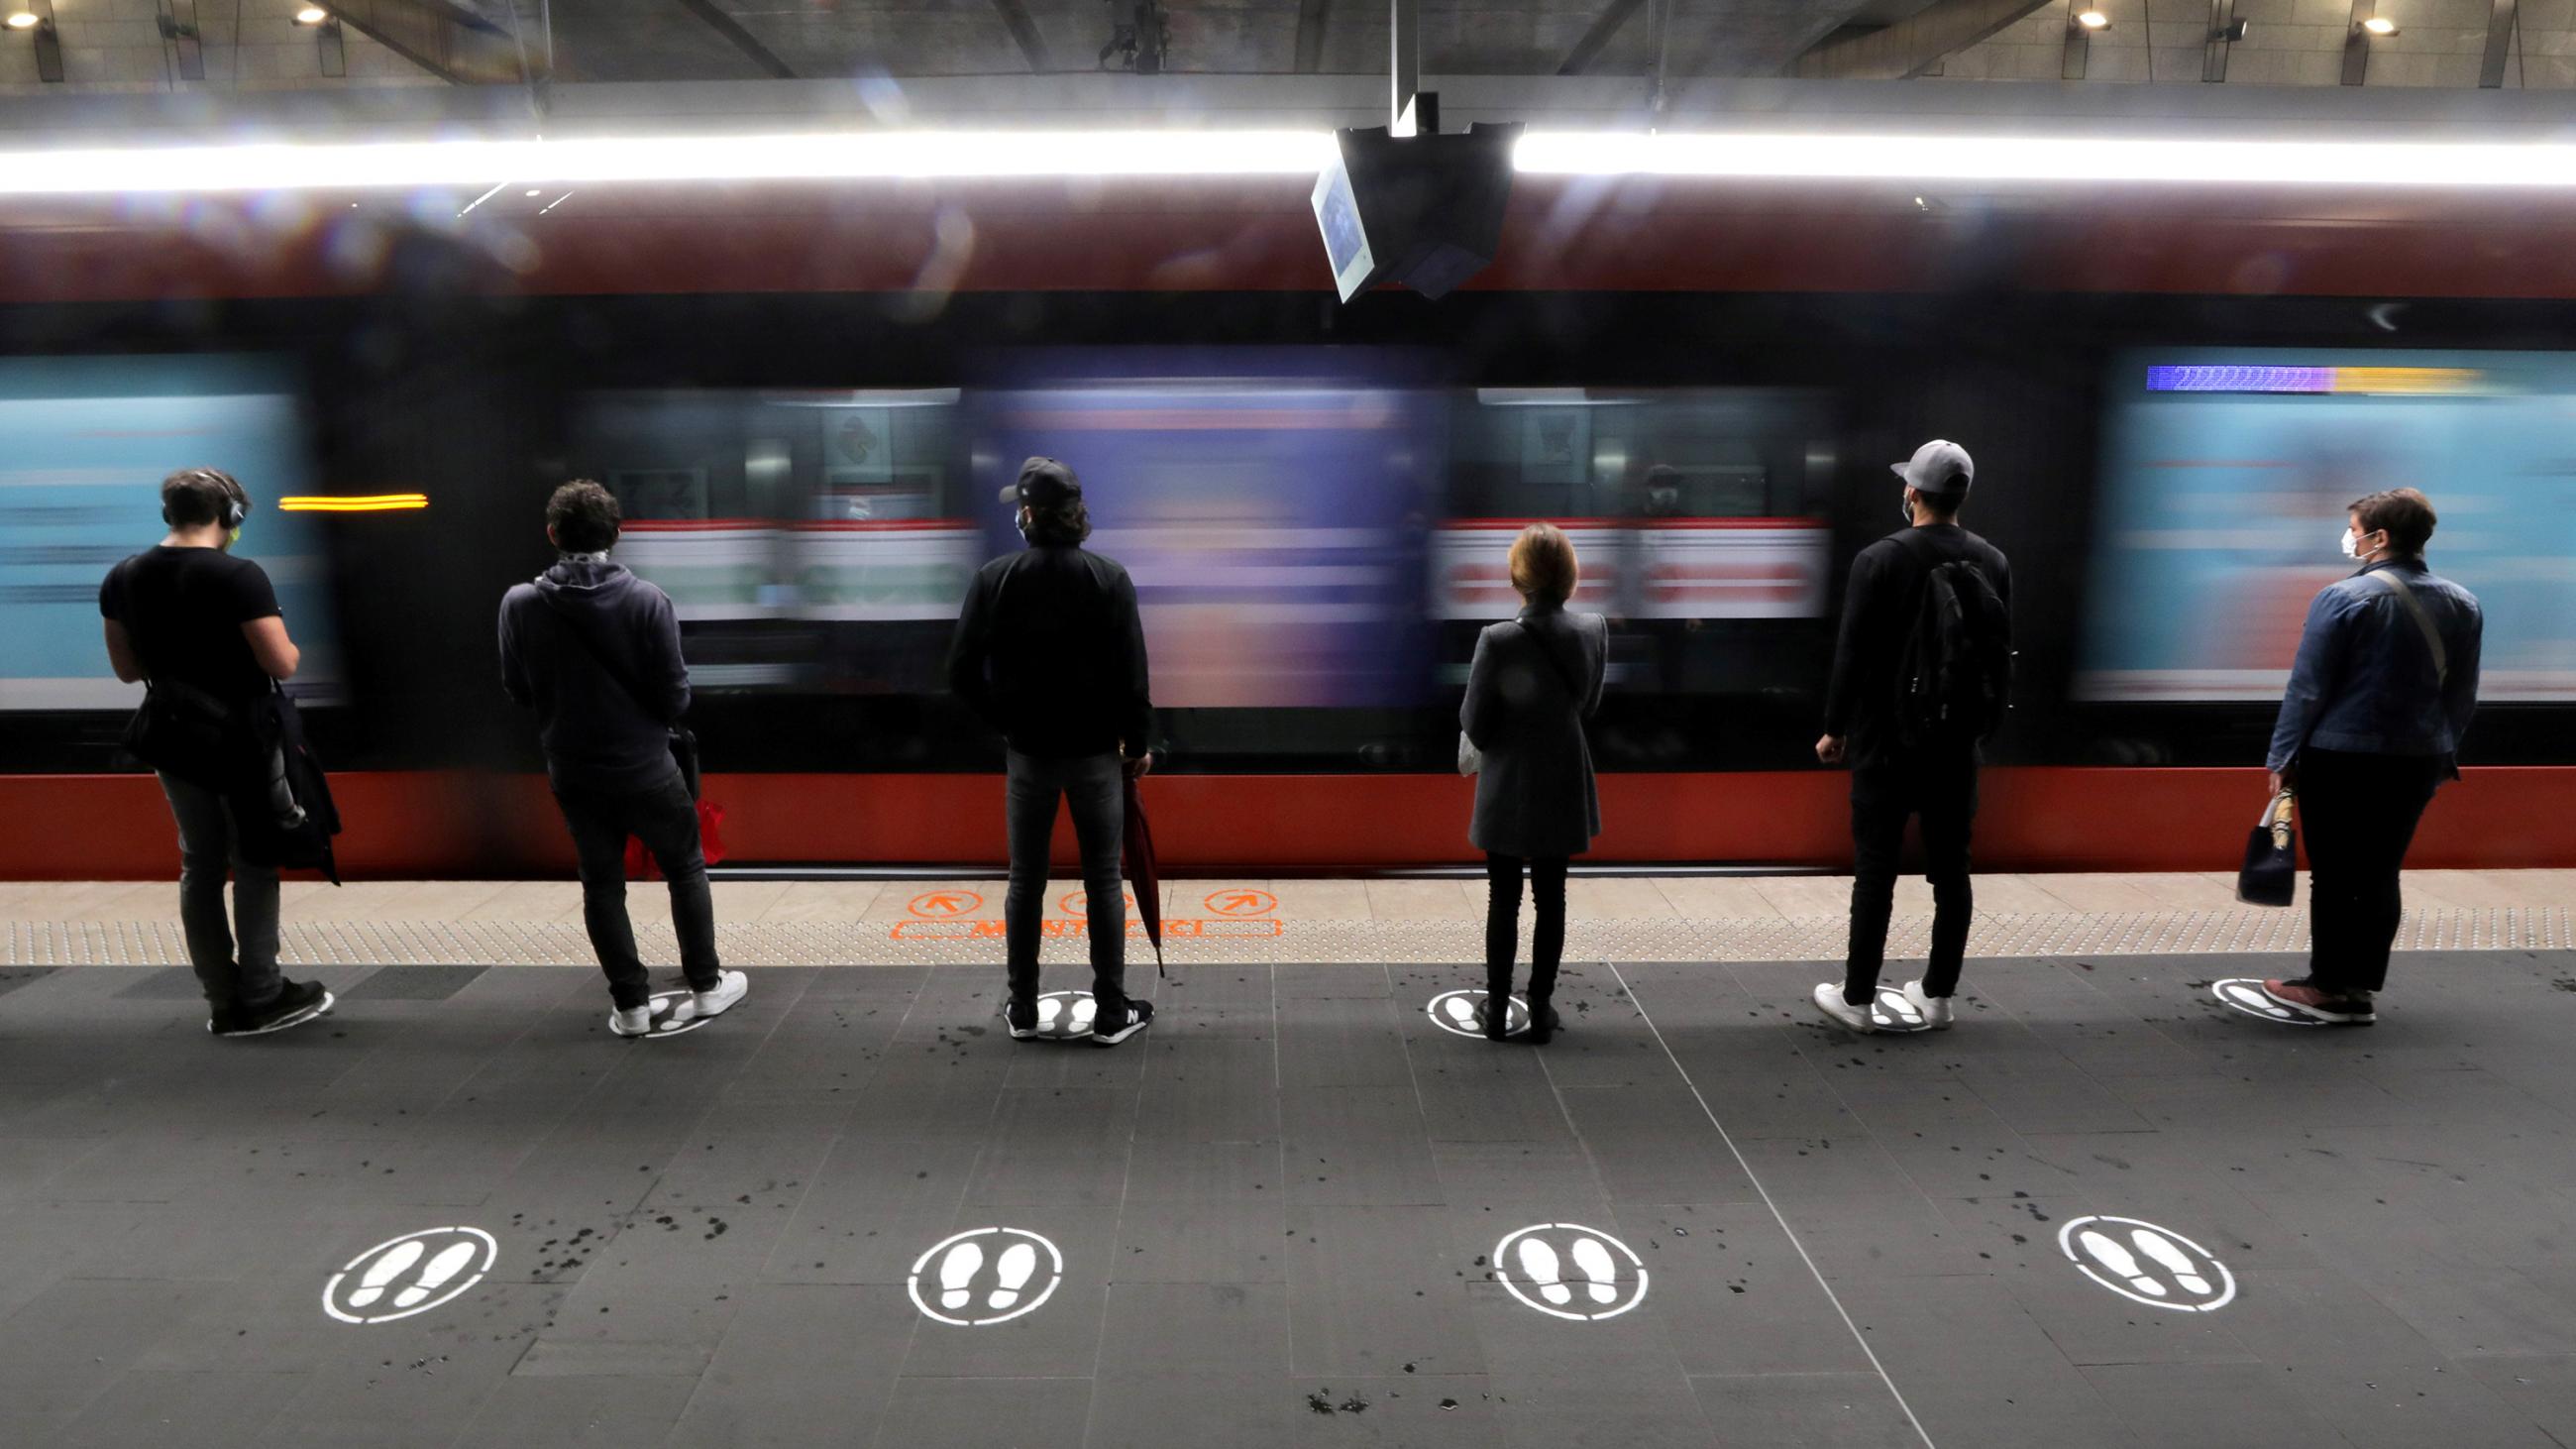 The photo shows people standing on paintef signs of feet on the platform with their backs to the camera as a train rushes by. 